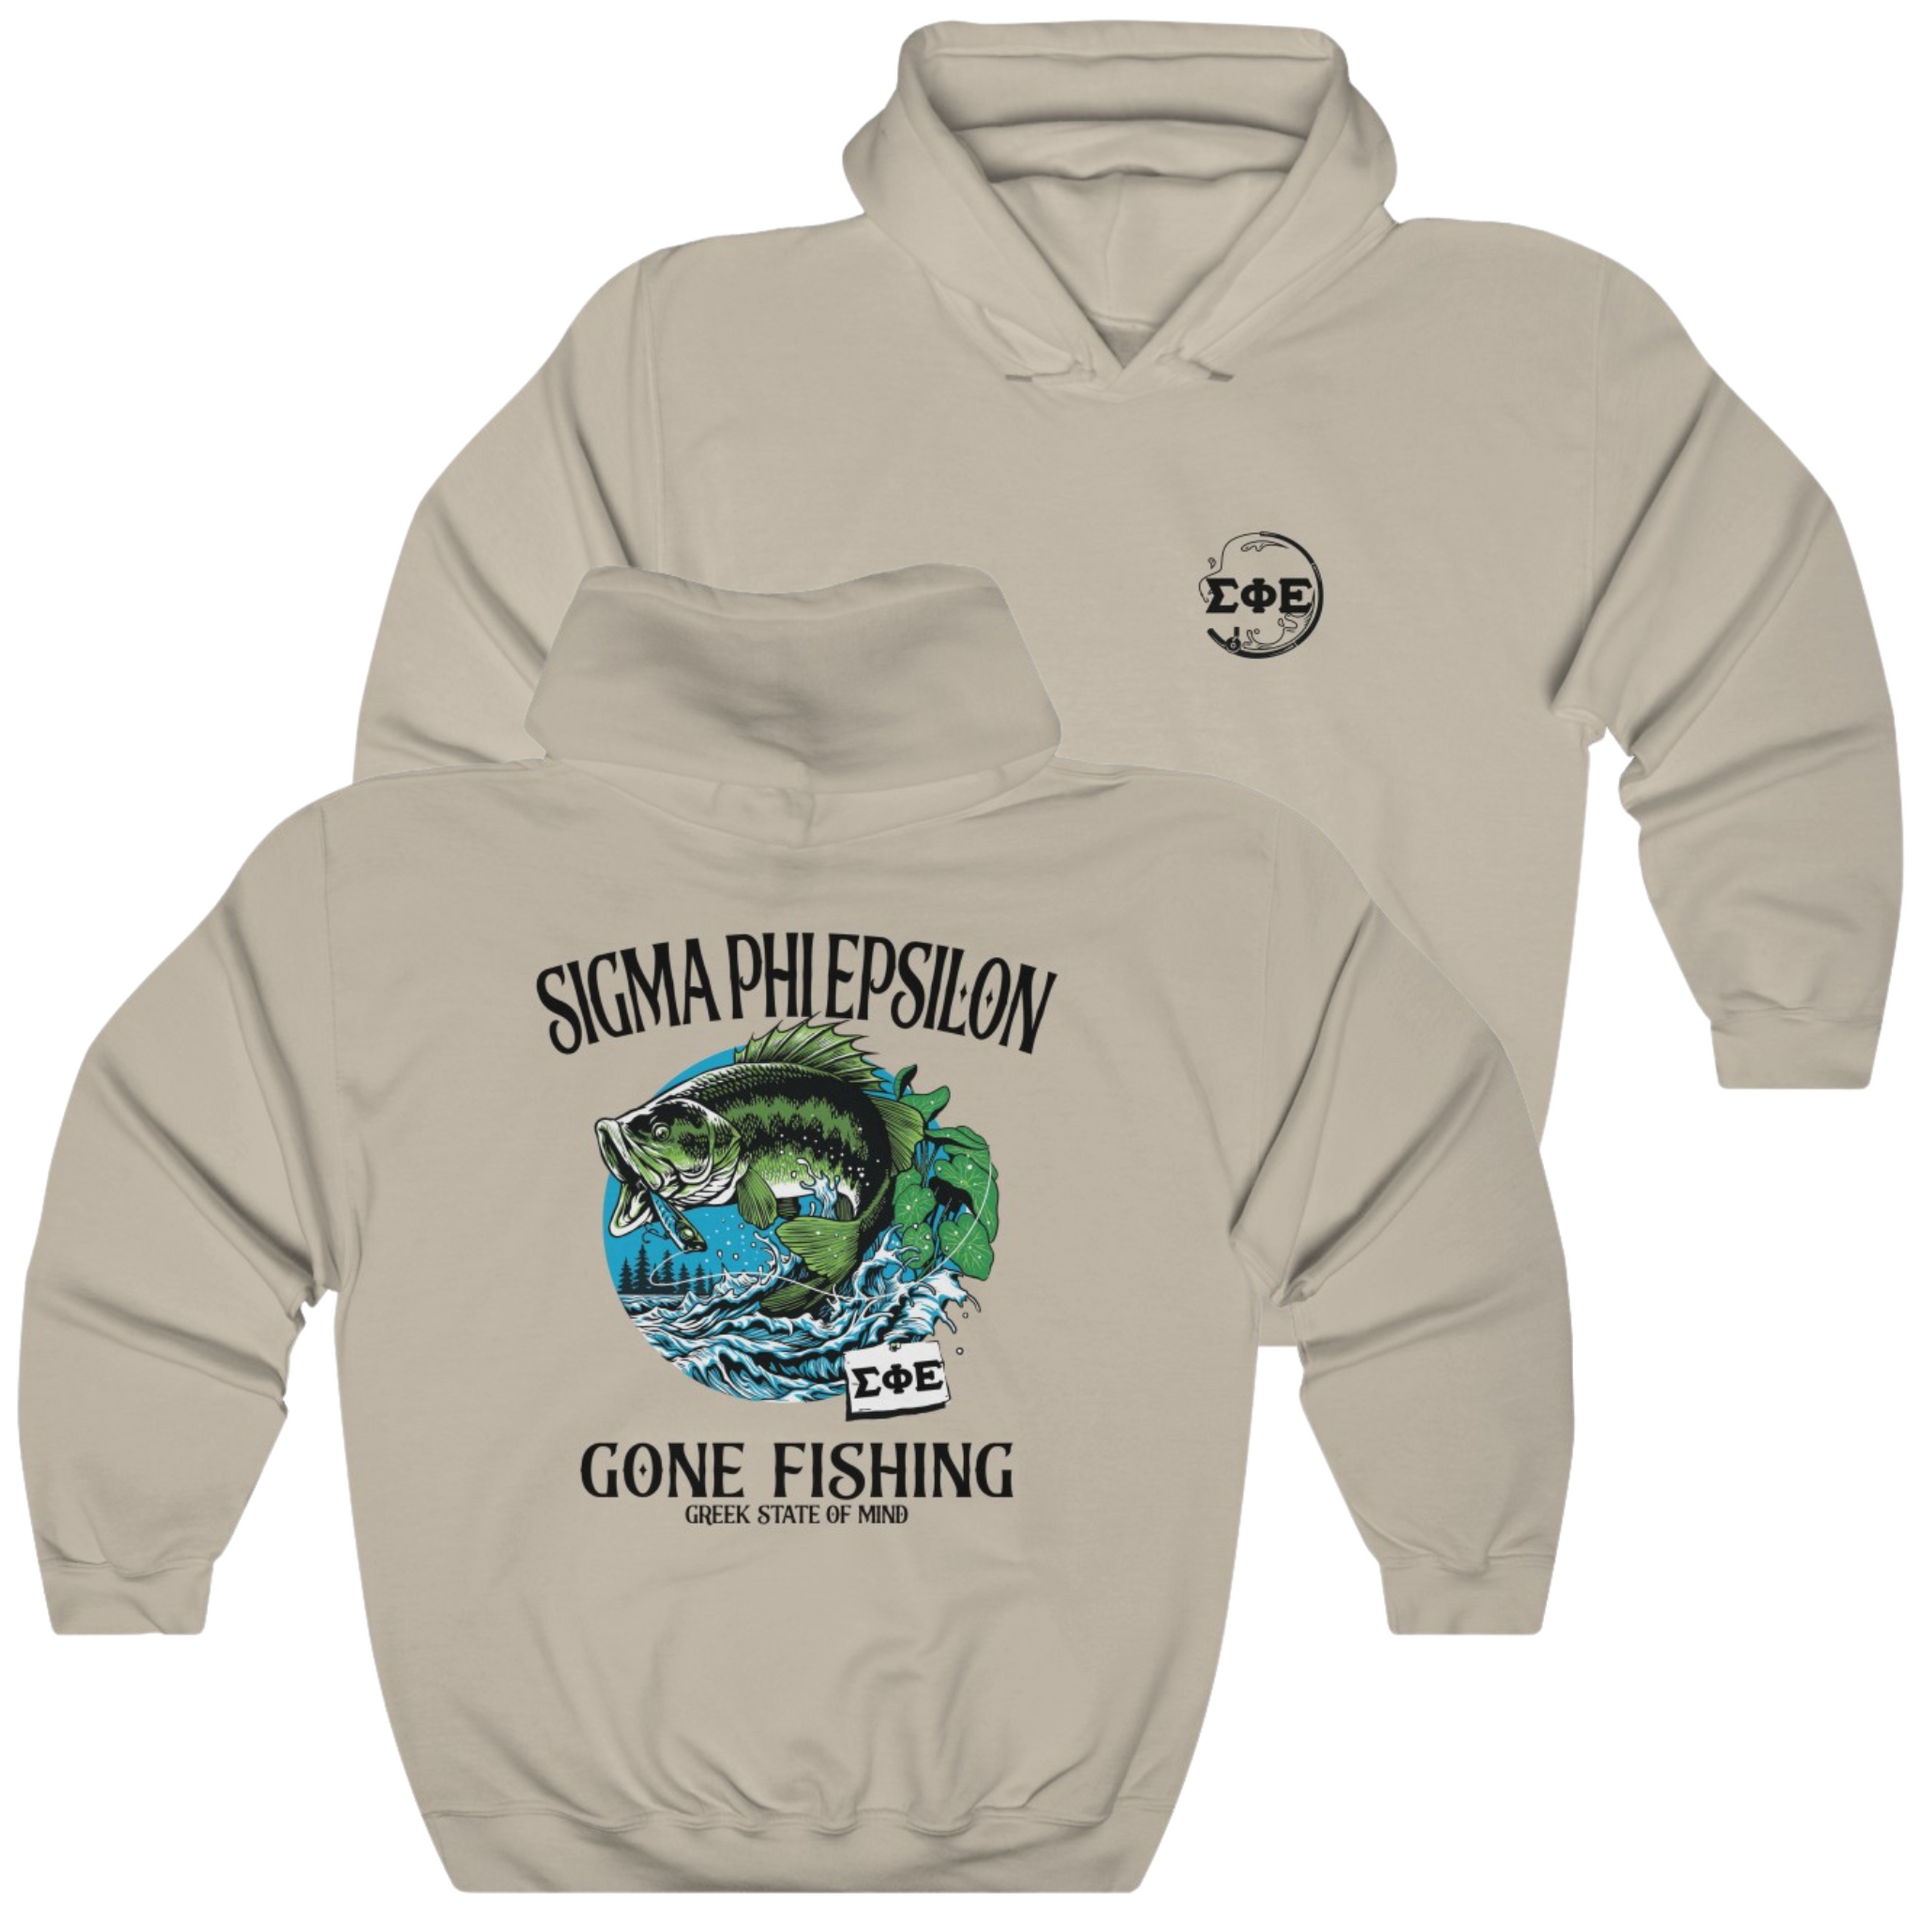 Sand Sigma Phi Epsilon Graphic Hoodie | Gone Fishing | SigEp Clothing - Campus Apparel